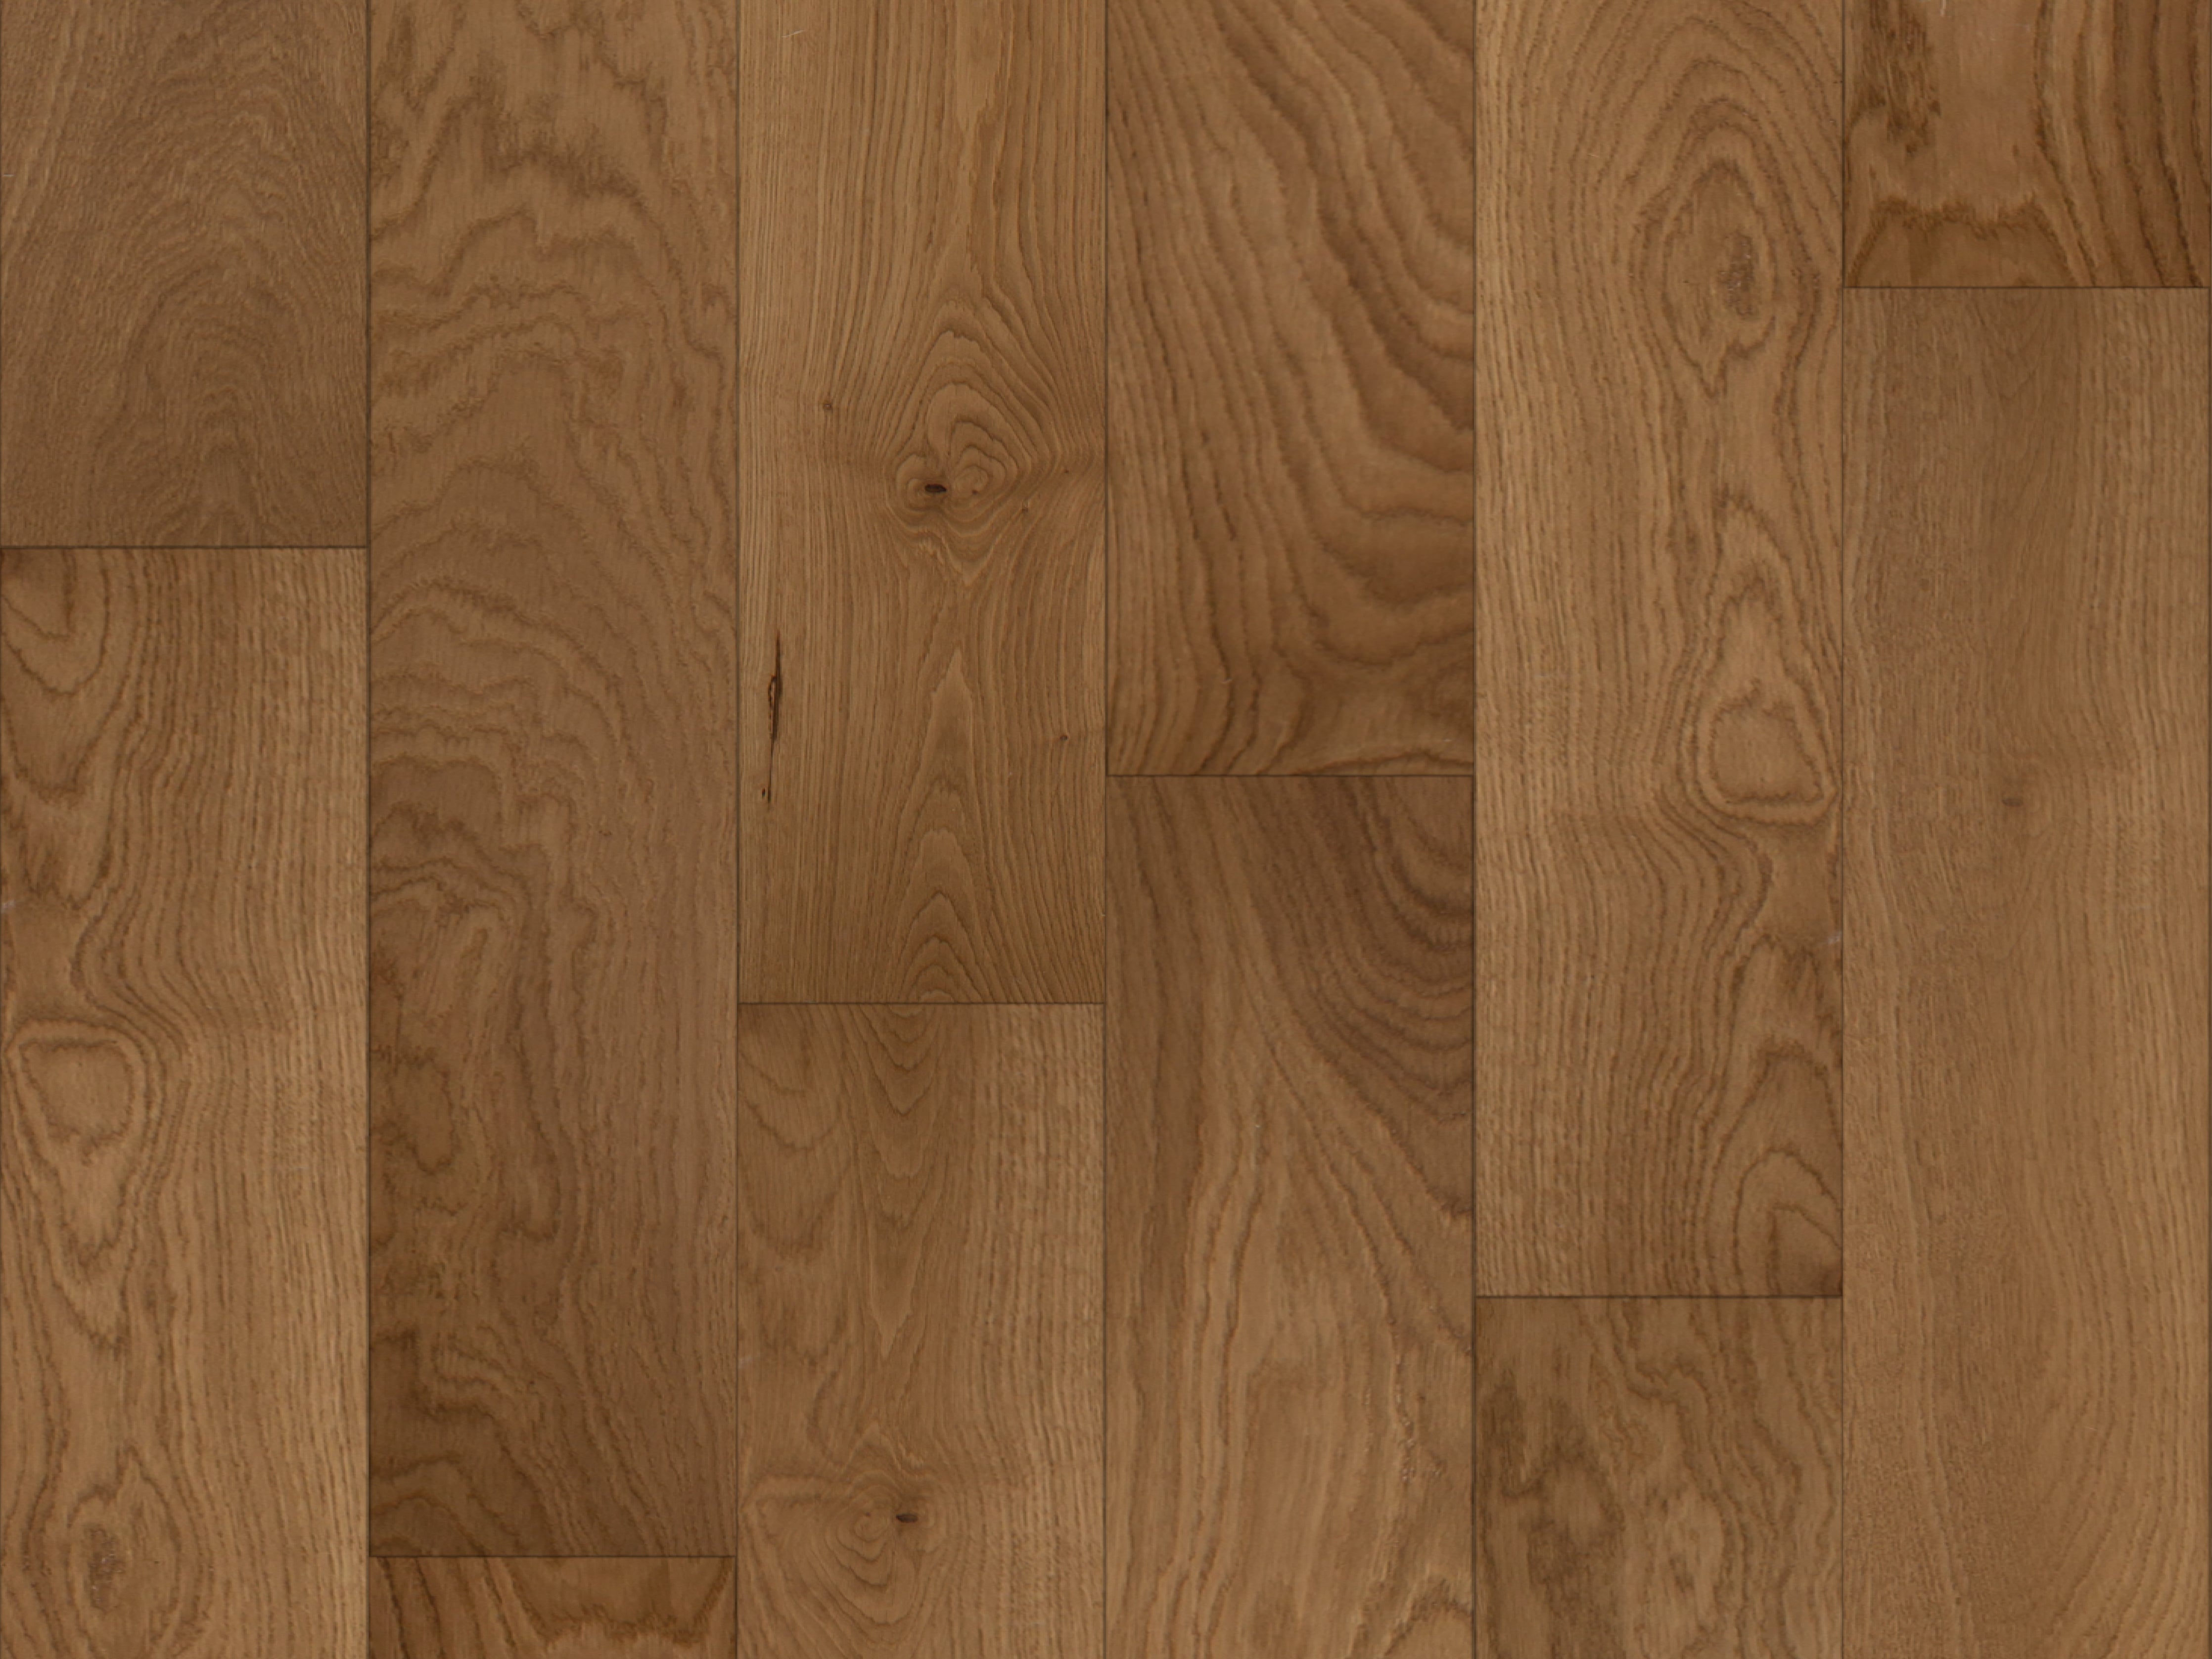 duchateau signature vernal bois fume european oak engineered hardnatural wood floor uv oil finish for interior use distributed by surface group international